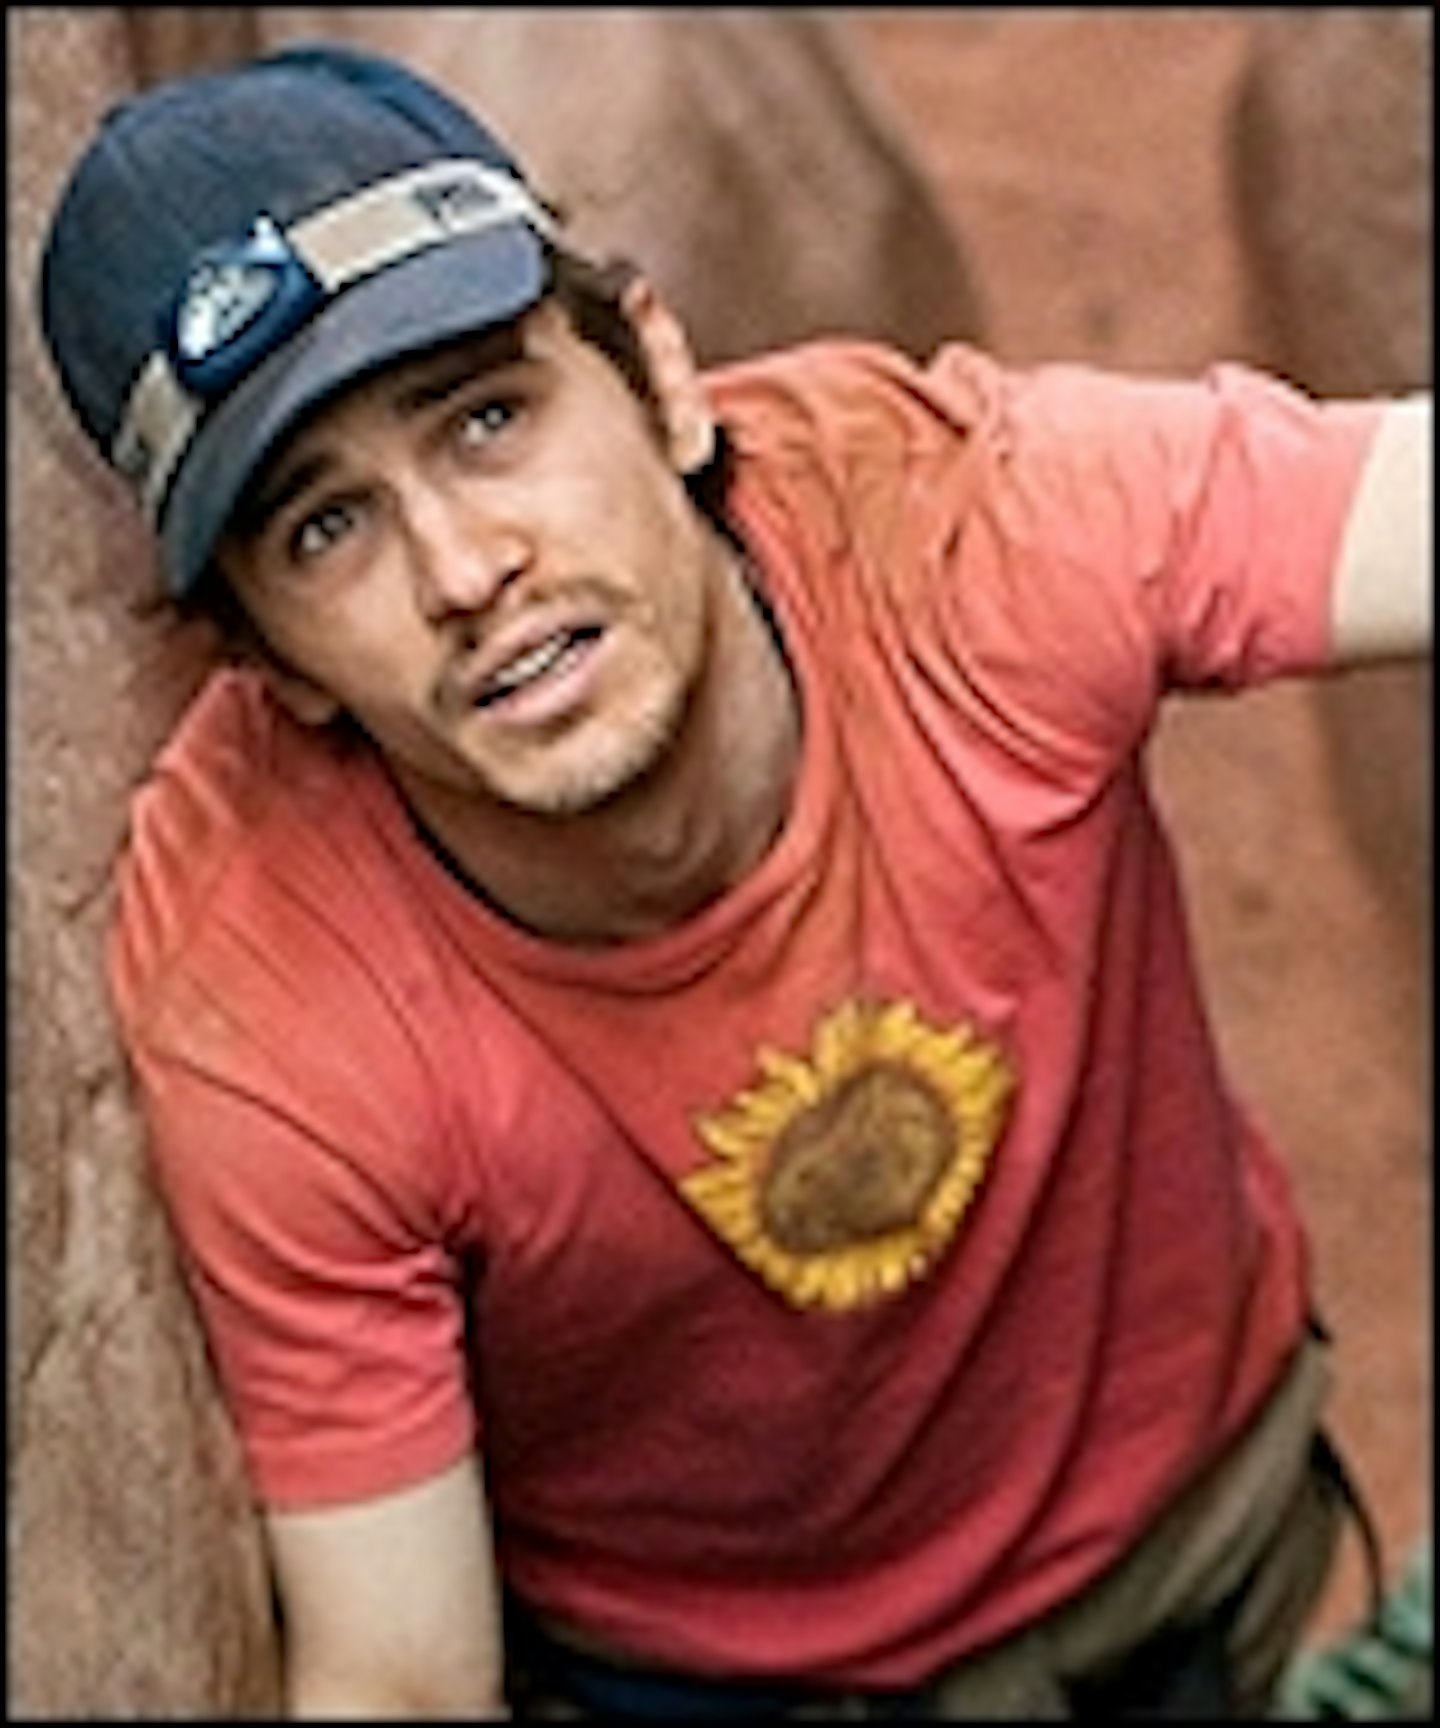 New 127 Hours Trailer Is Online